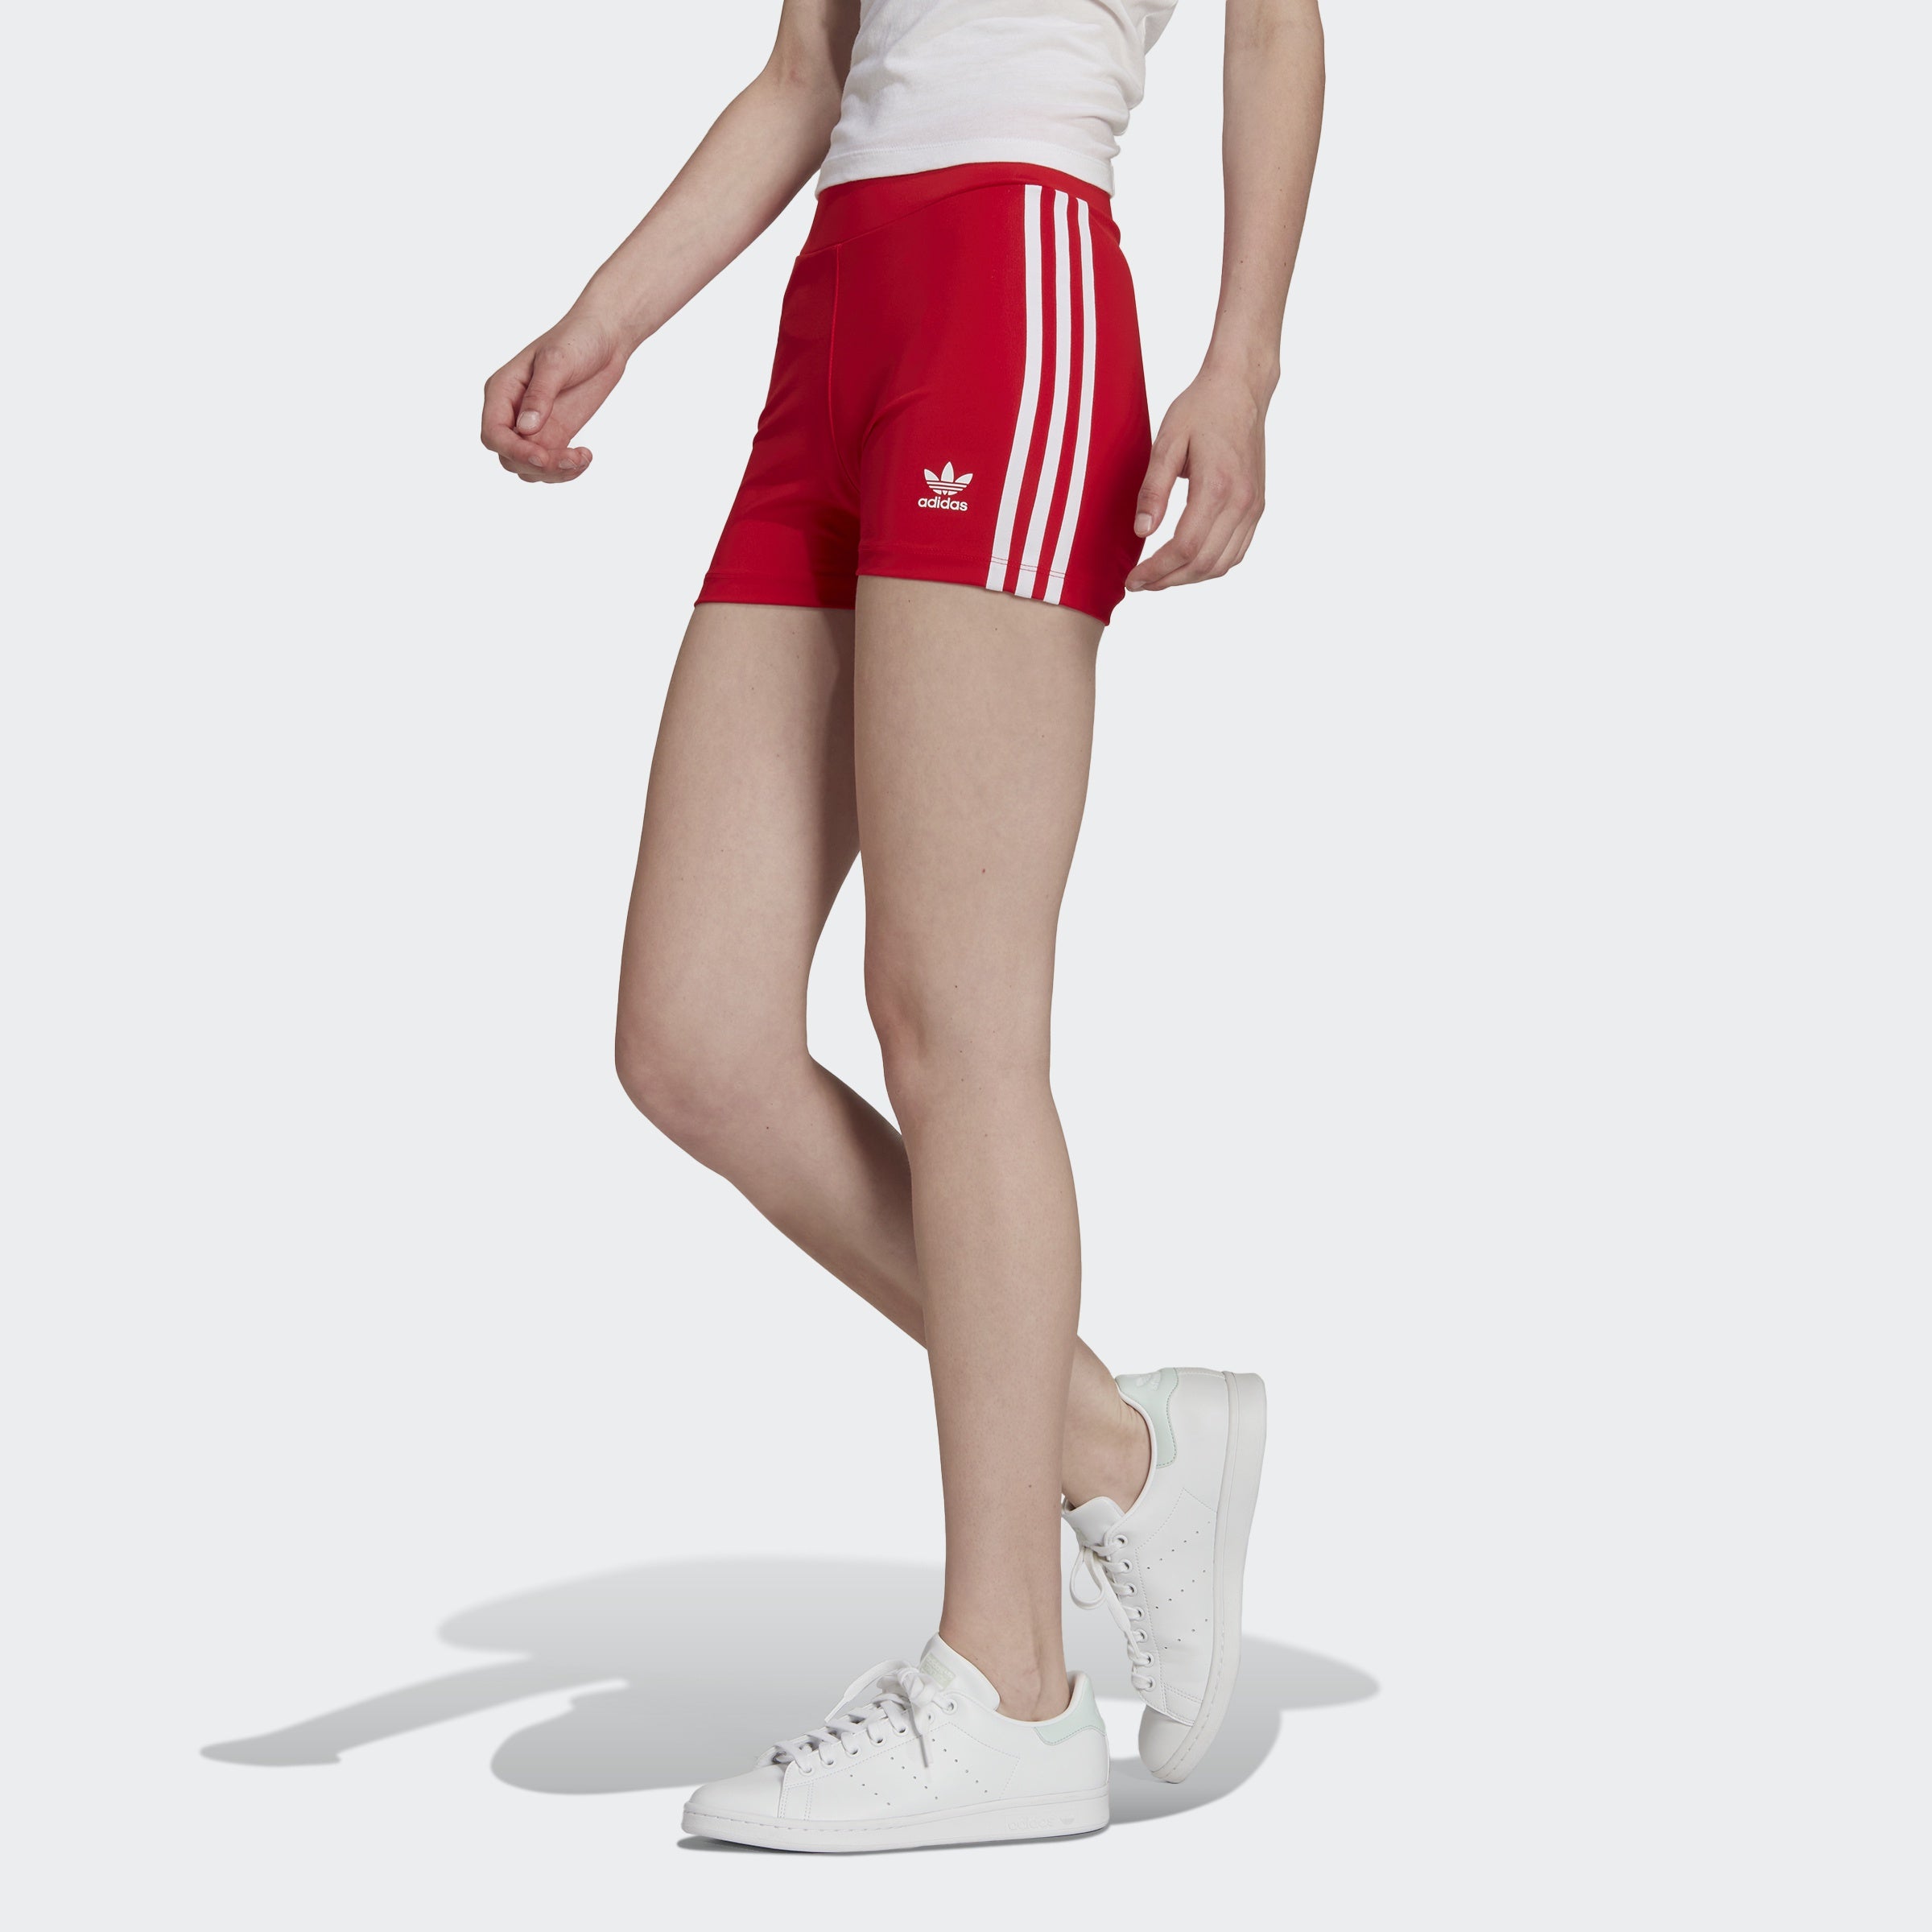 Adidas Women's Traceable Red Shorts